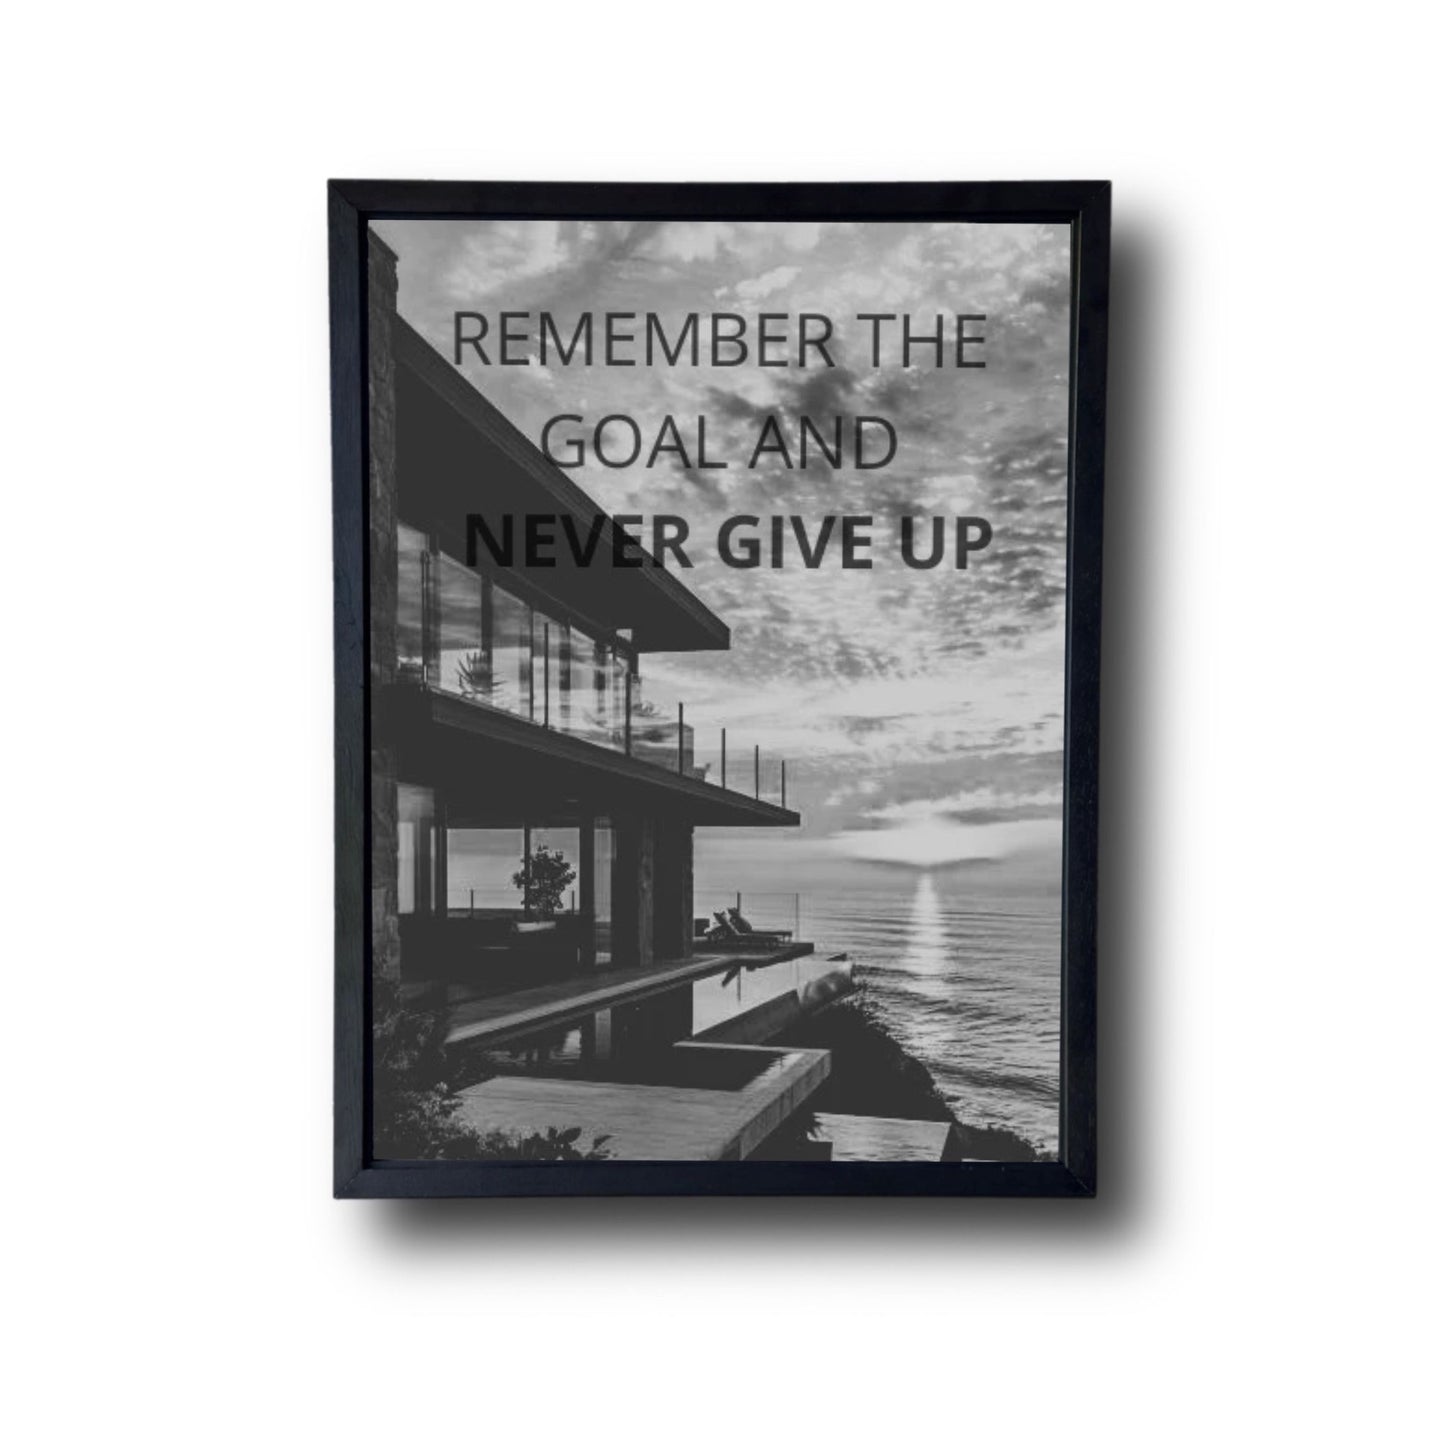 REMEMBER THE GOAL AND NEVER GIVE UP